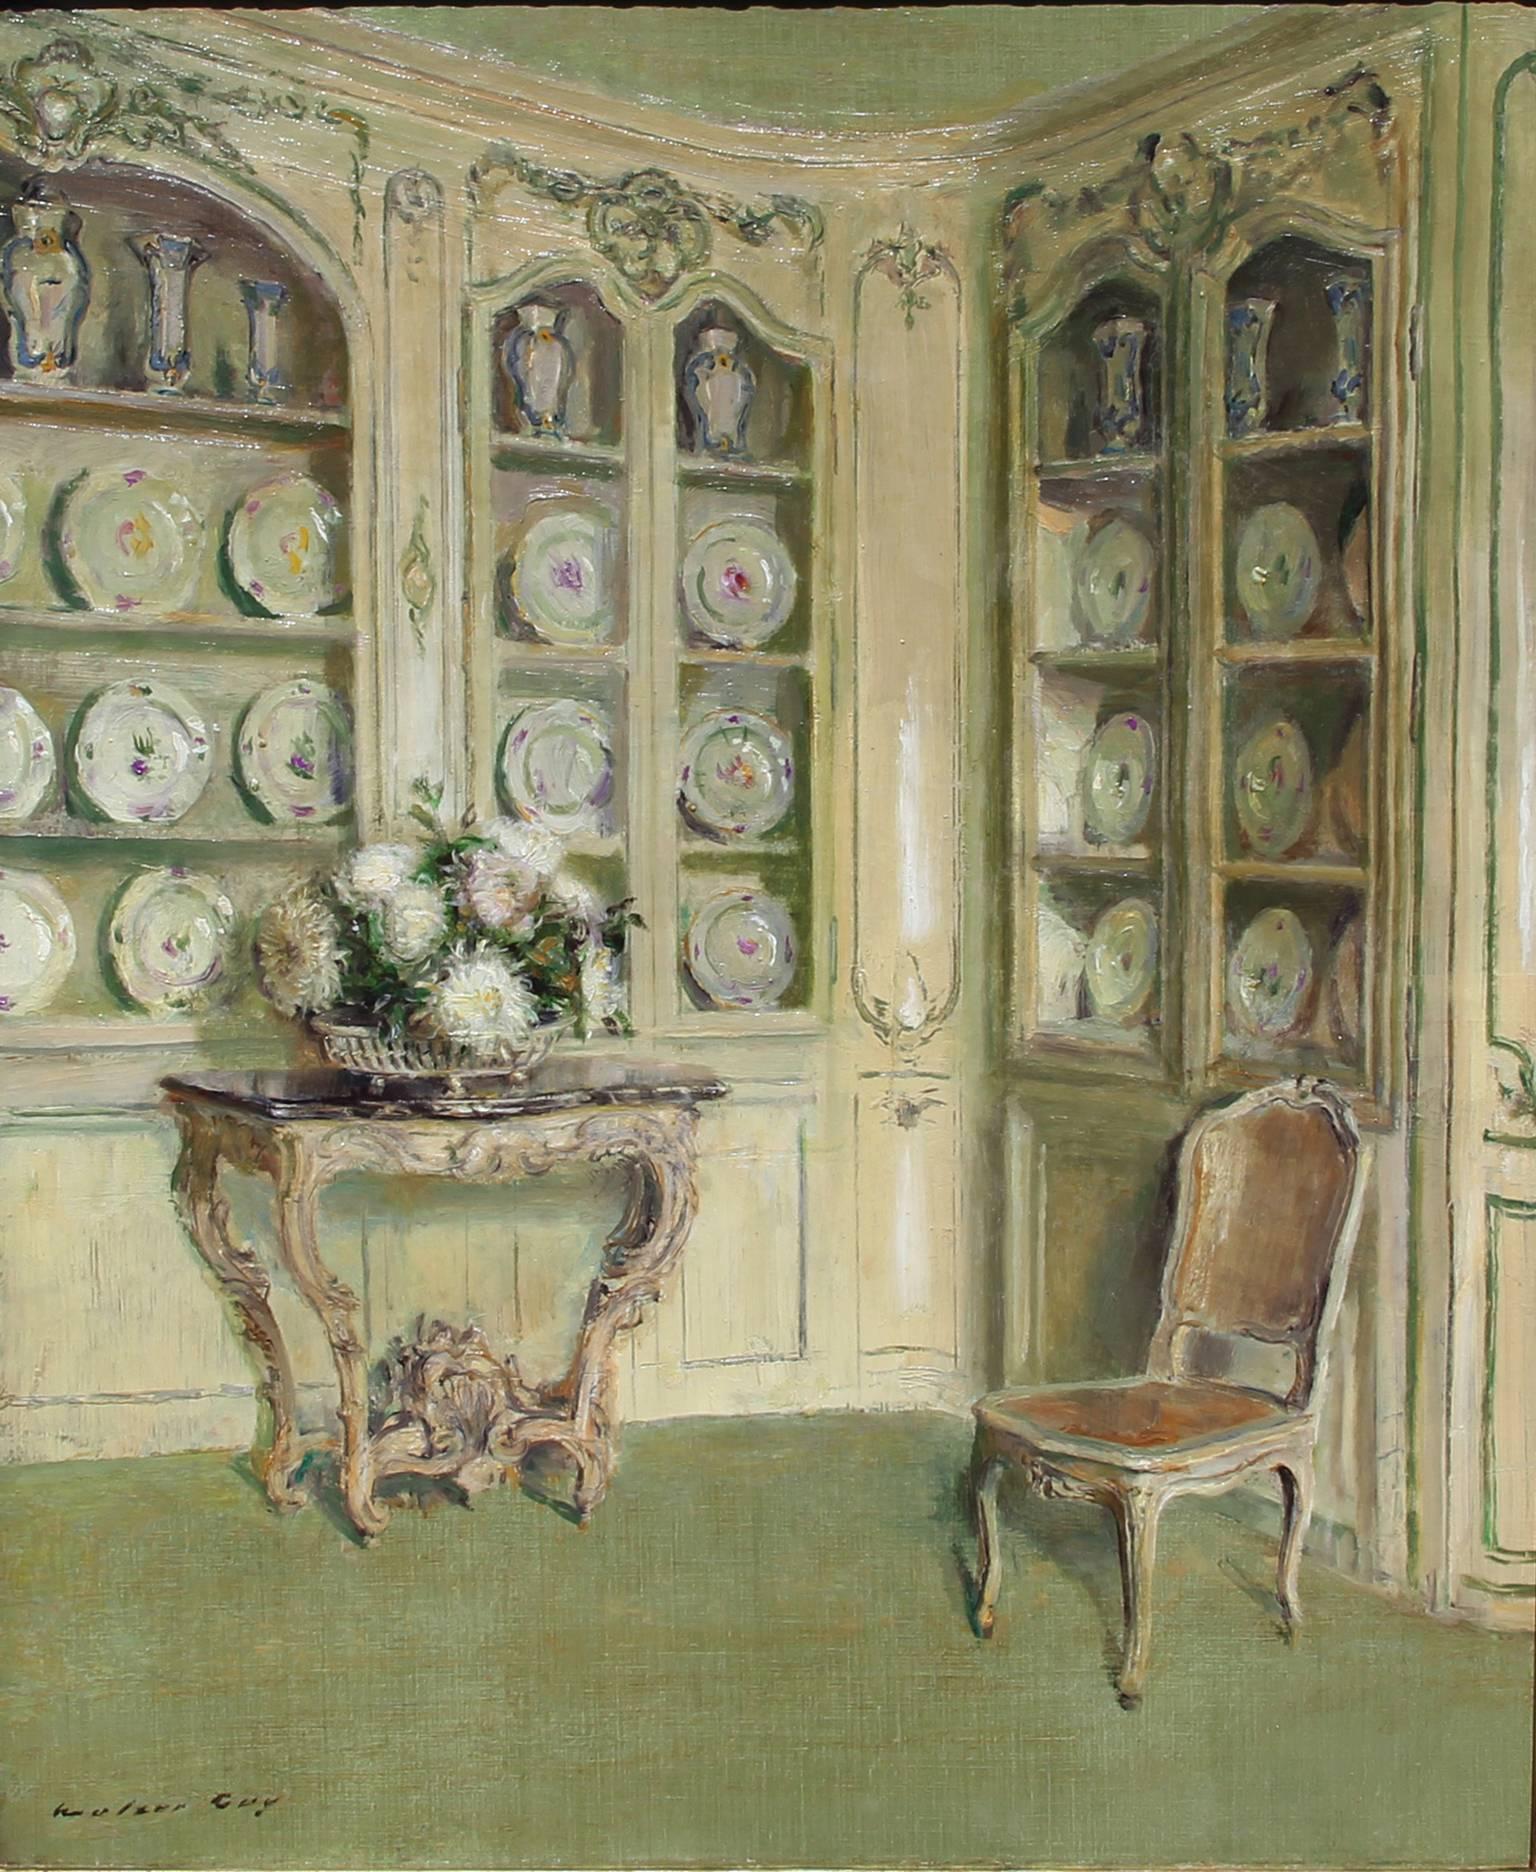 WALTER GAY
American, 1856–1937

Porcelains, Château du Bréau

Signed Walter Gay
Oil on canvas
21¾ x 18¼ inches (55.2 x 46.4 cm)
Framed: 29 x 25 inches (73.8 x 63.6 cm)

Provenance
M. Knoedler & Co., New York
Clarence L. Hay, New York, by 1920
E.